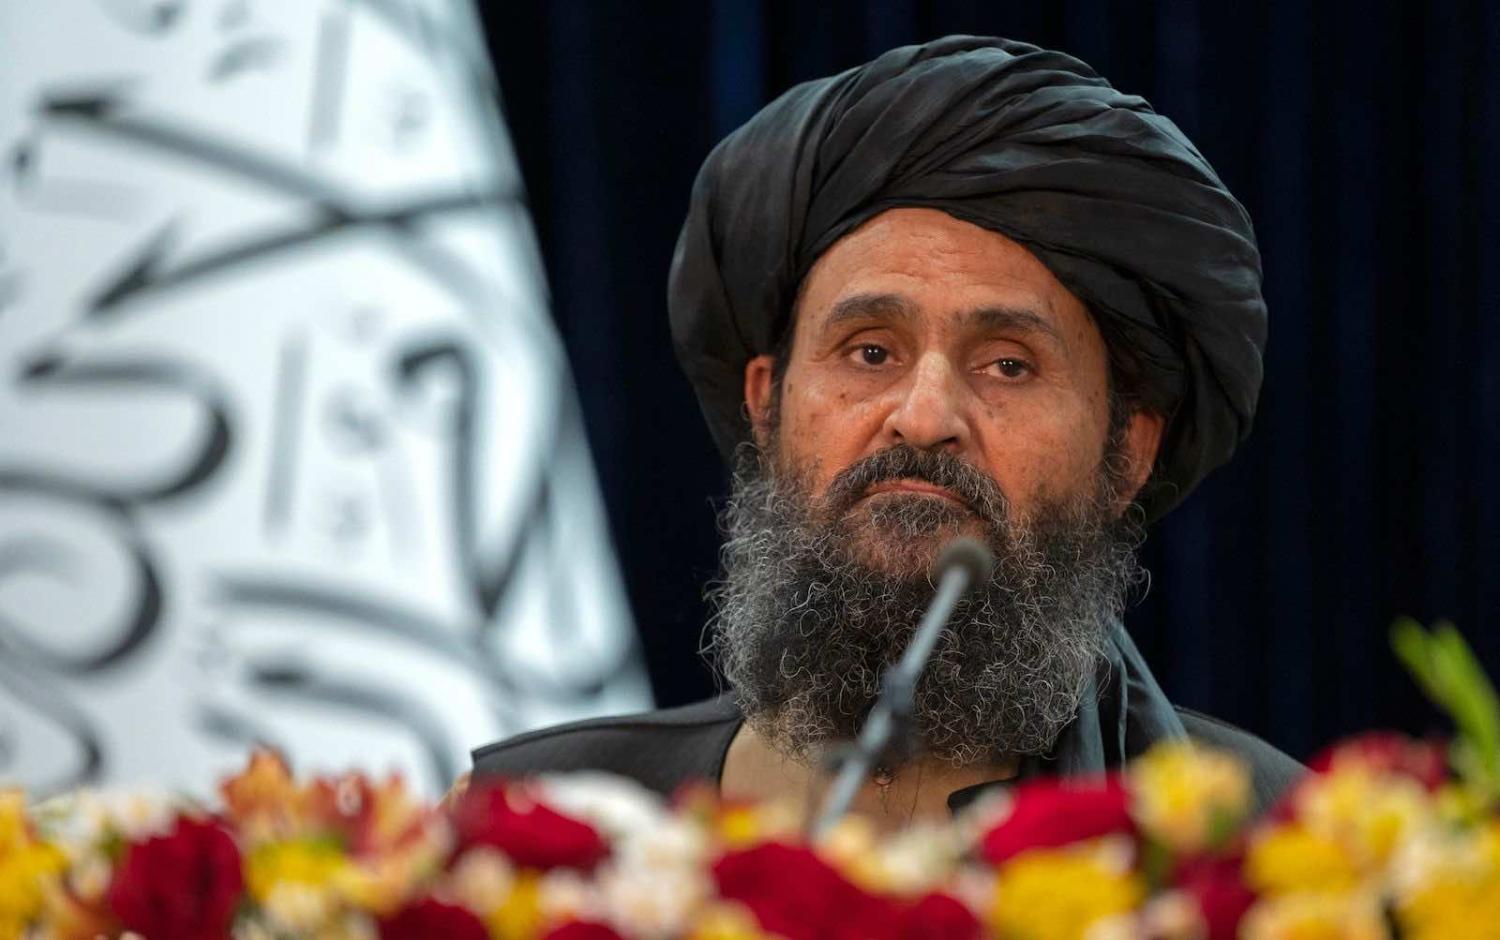 The Taliban’s acting first deputy prime minister Abdul Ghani Baradar at a press conference last month in Kabul (Wakil Kohsar/AFP via Getty Images)